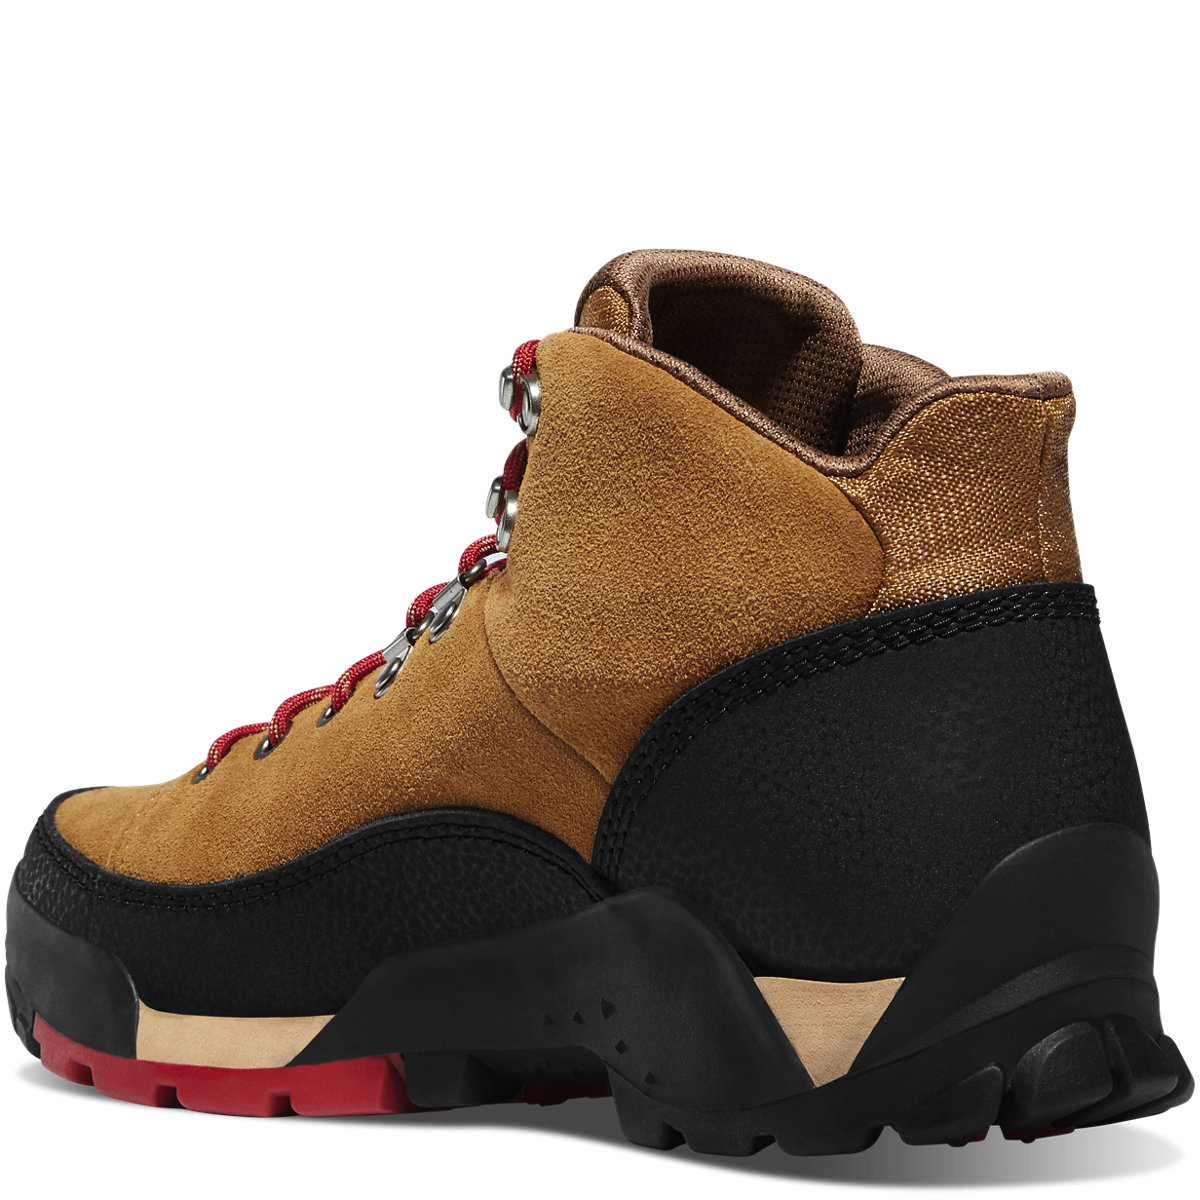 Women's Panorama Mid 6" Brown/Red